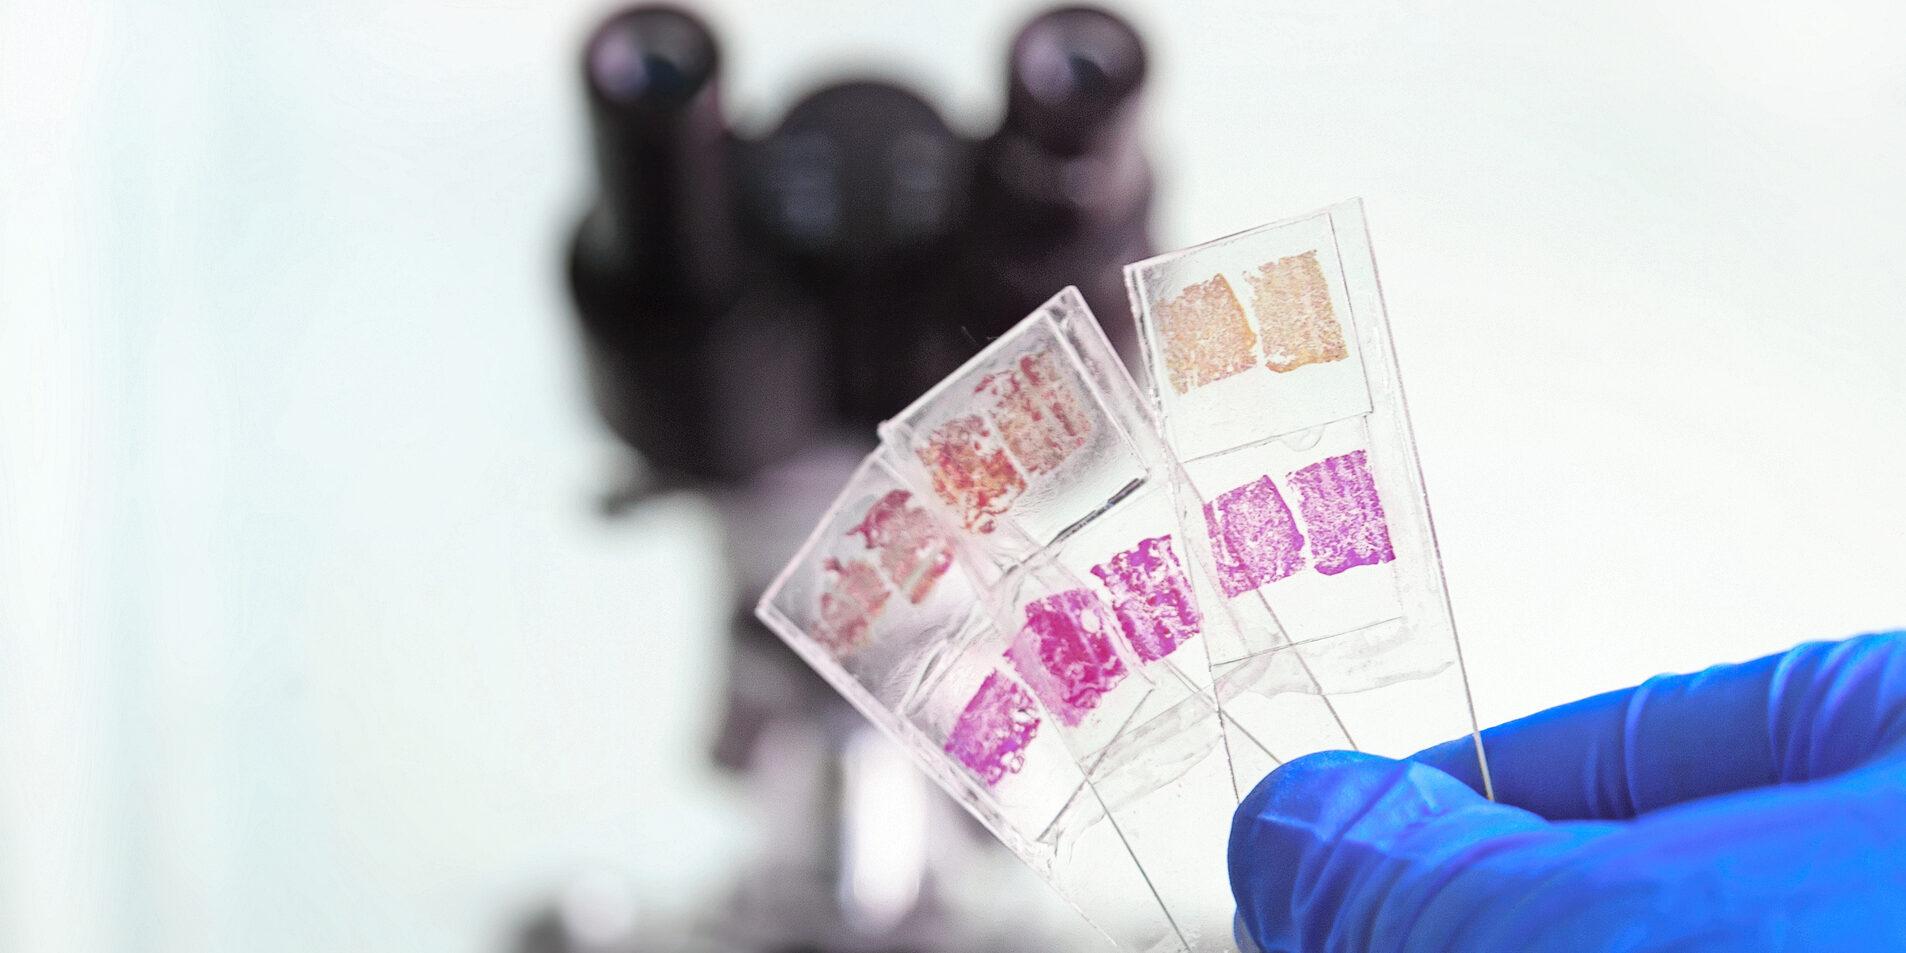 Glass slides in the laboratory. Hand in blue glove holding glass organ samples. Histological examination. The microscope in the background blurred. Pathologist at work.